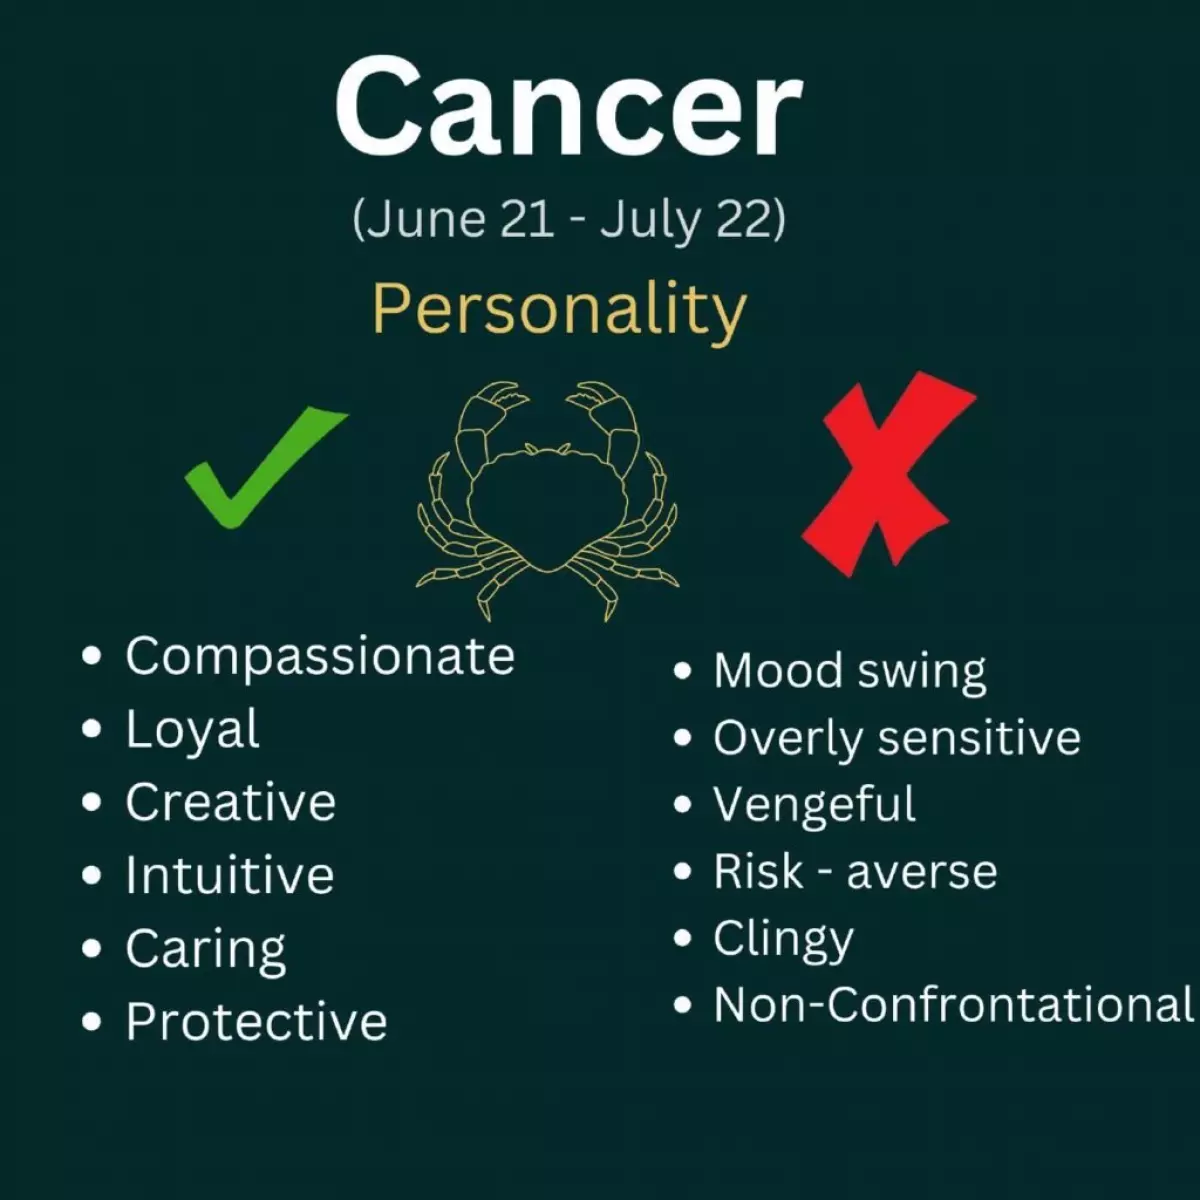 July-born Cancer Personality traits, both negative and positive